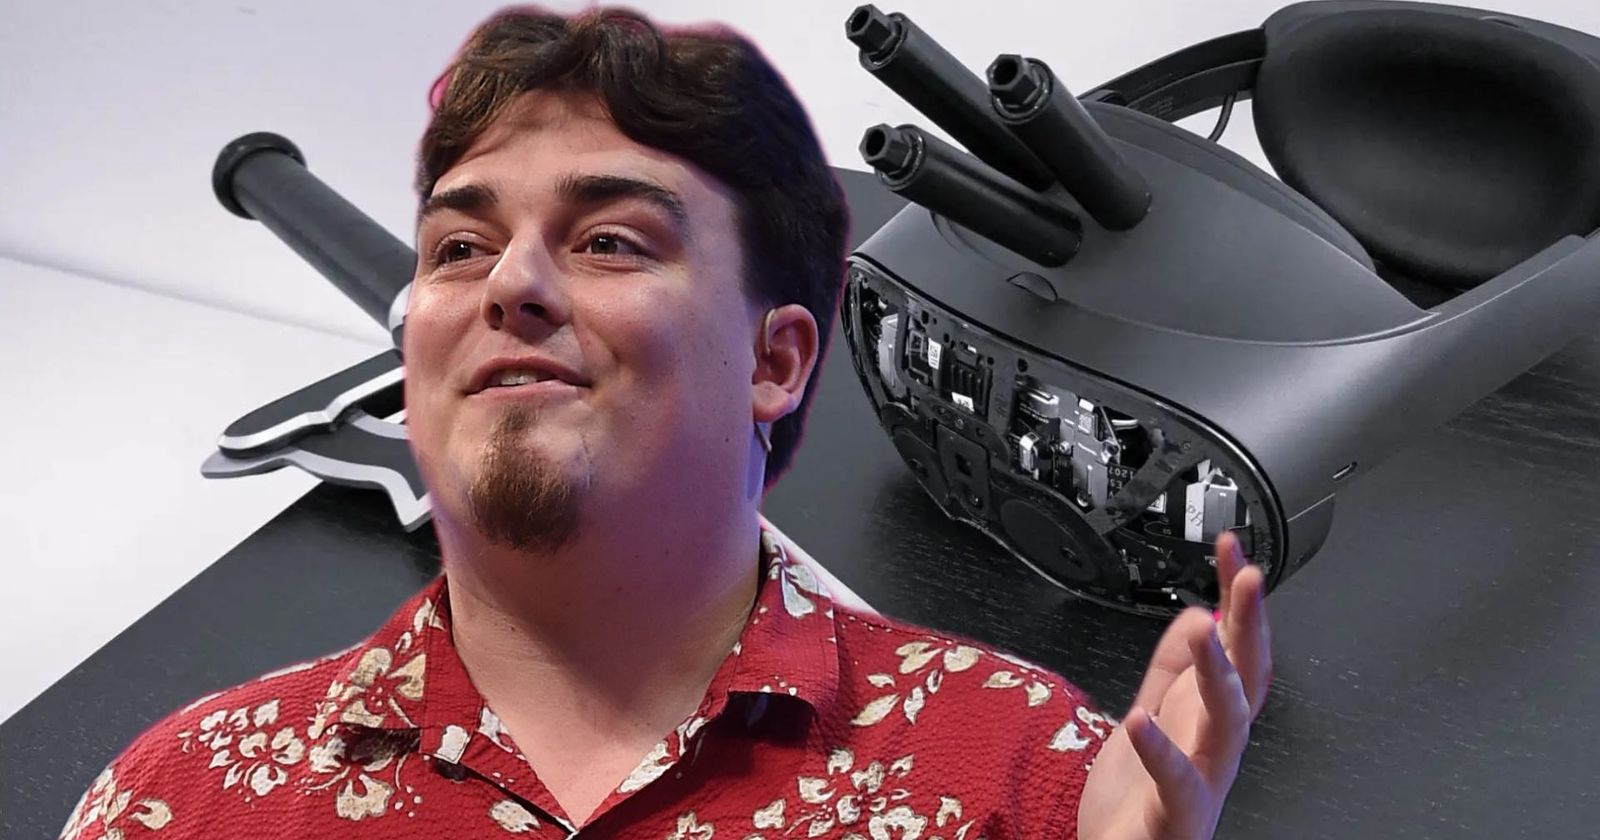 Oculus Founder Claims To Make VR Headset That Will Actually Kill You If You  Die In A Game